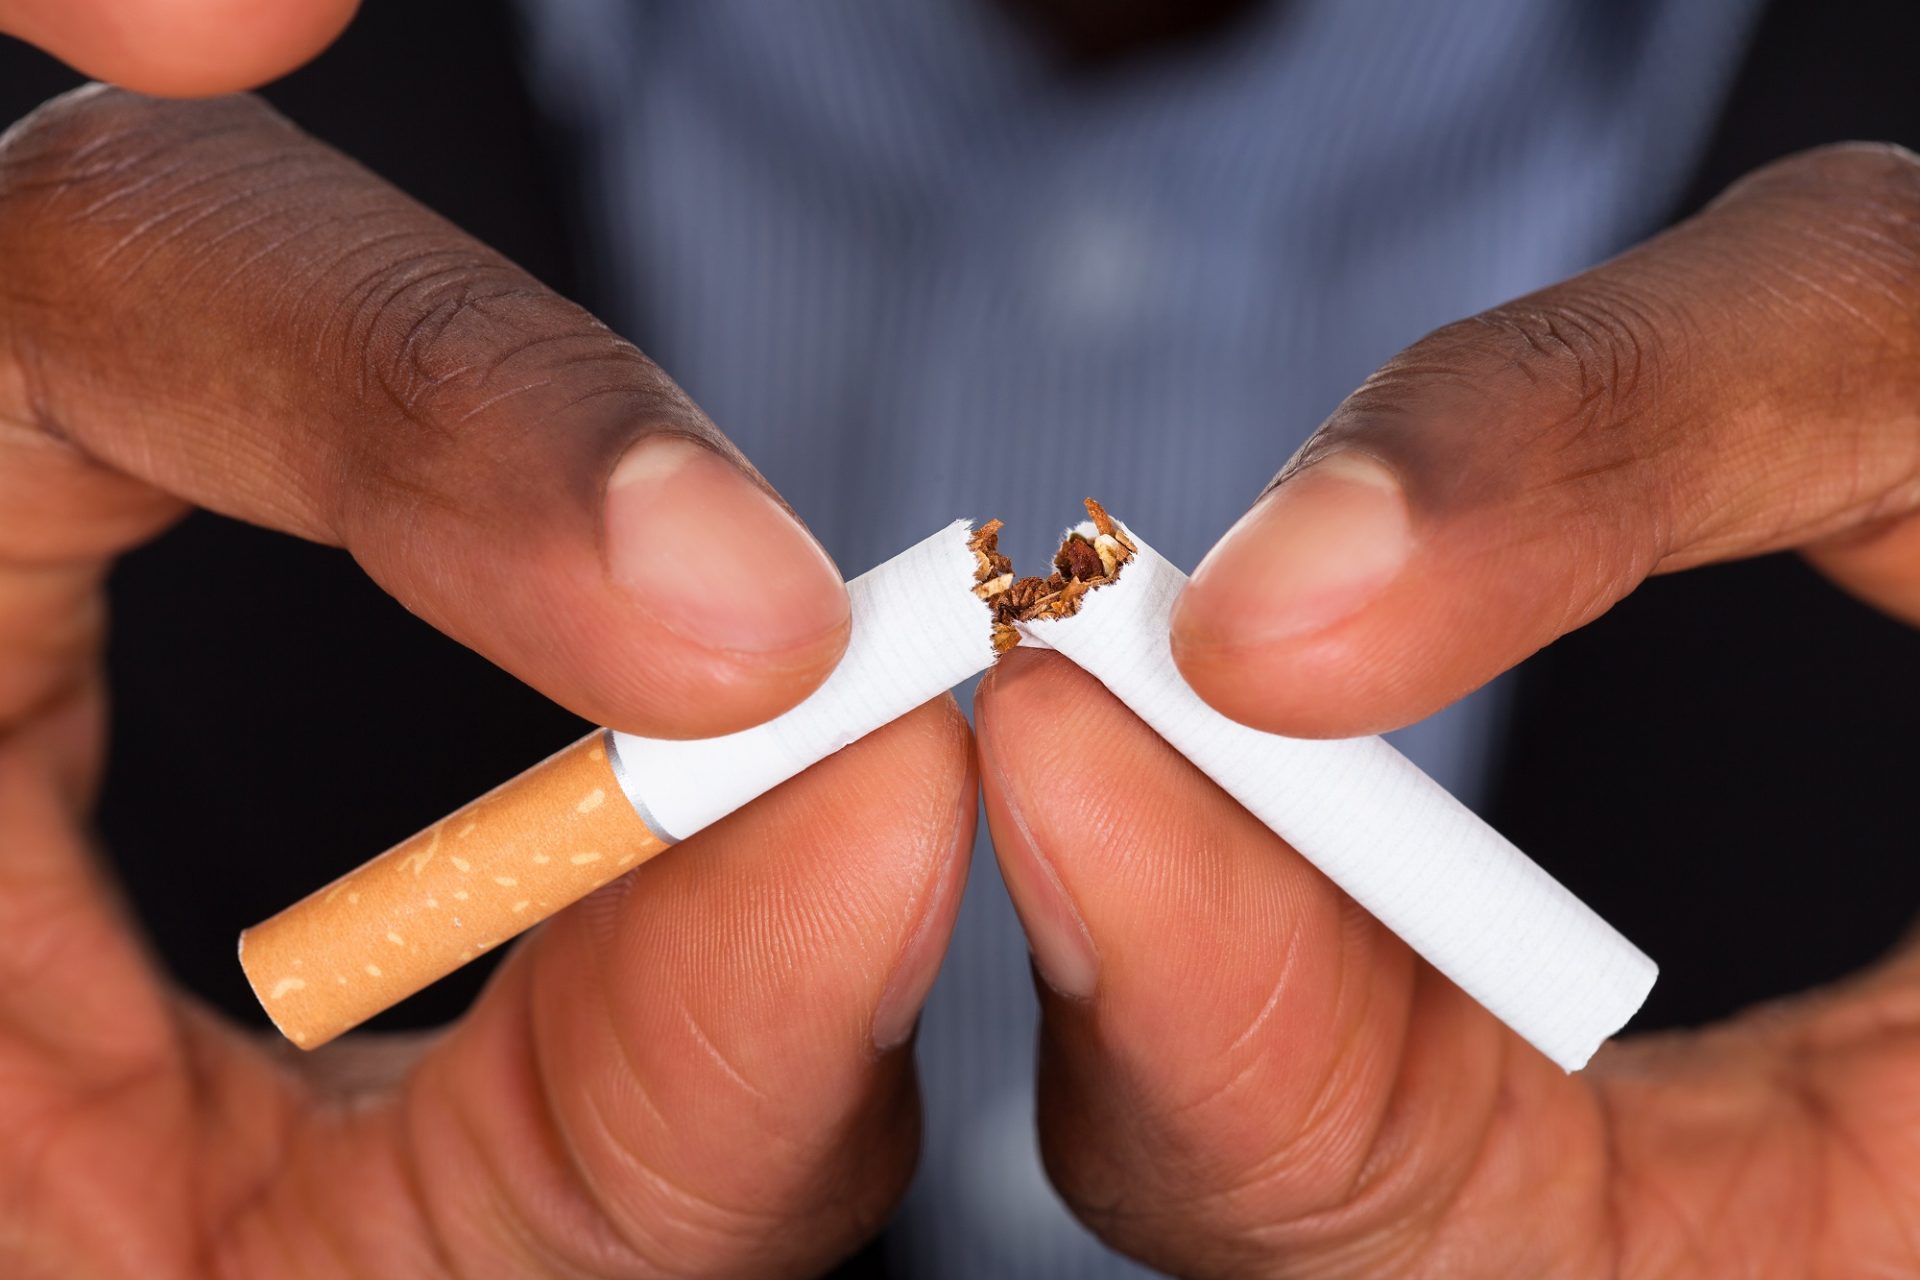 Cholesterol and Heart Disease: How Does Smoking Affect You?